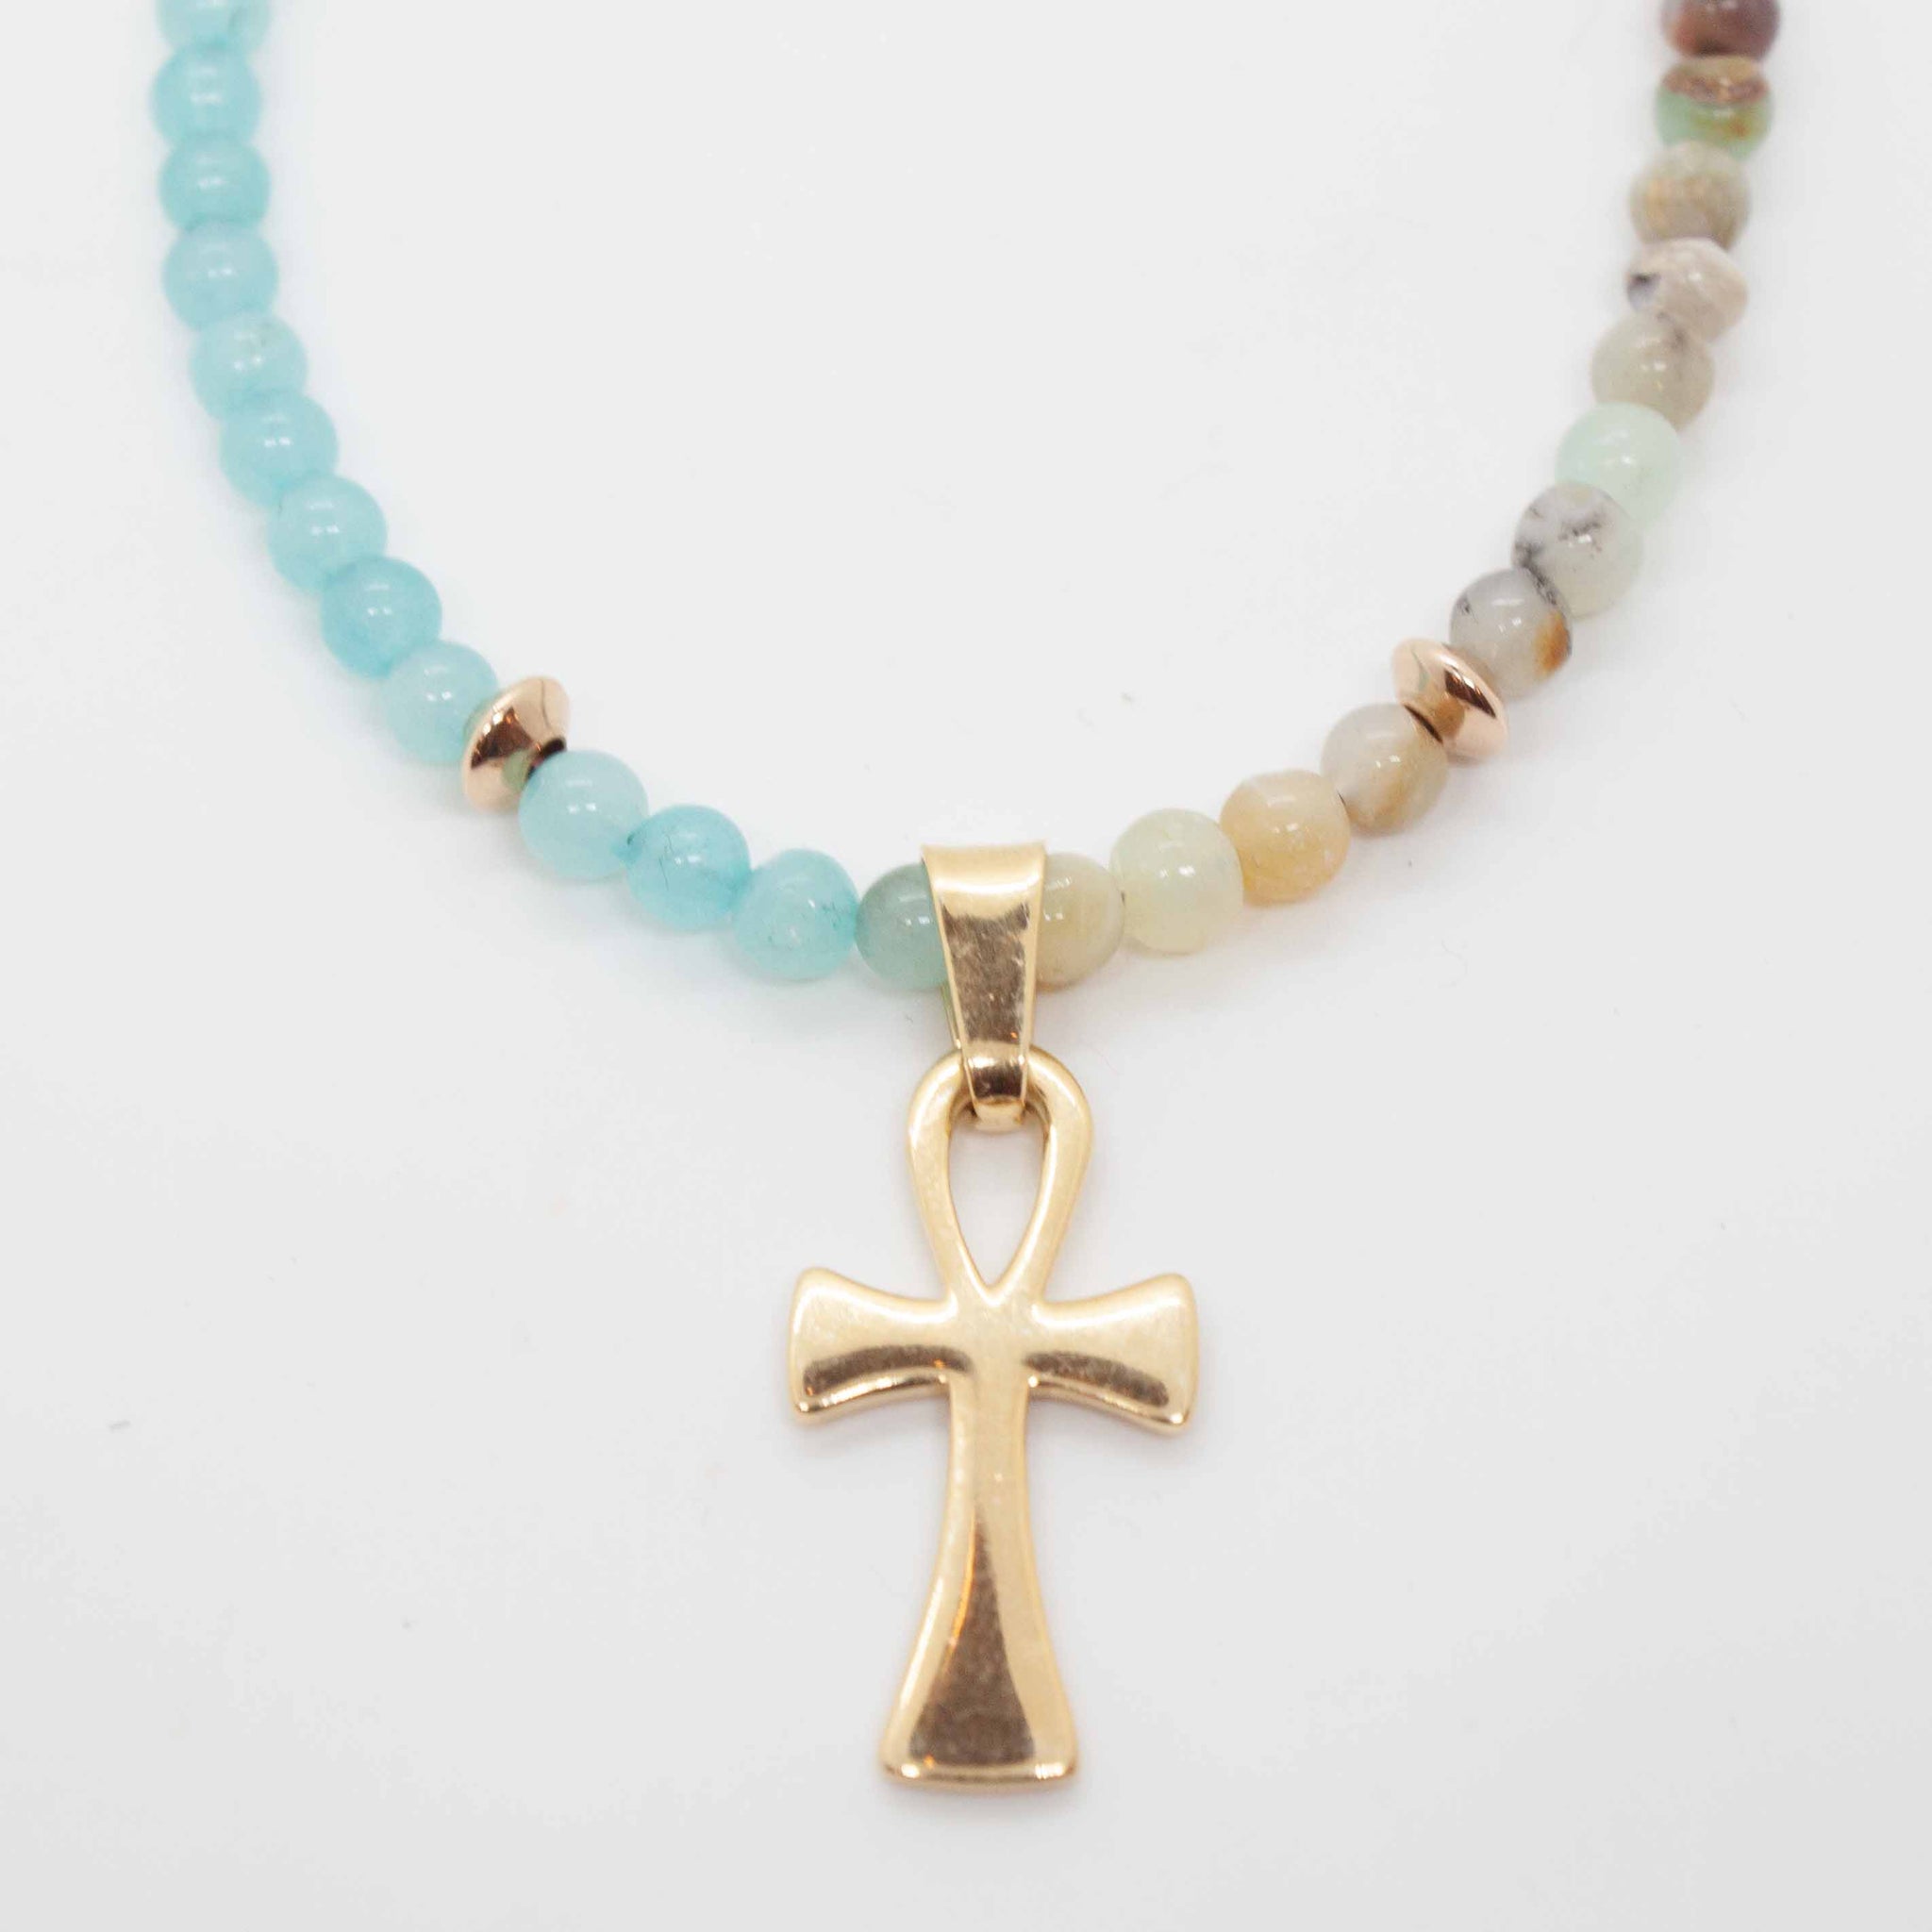 Jade and peruvian opal beaded necklace with gold ankh pendant.